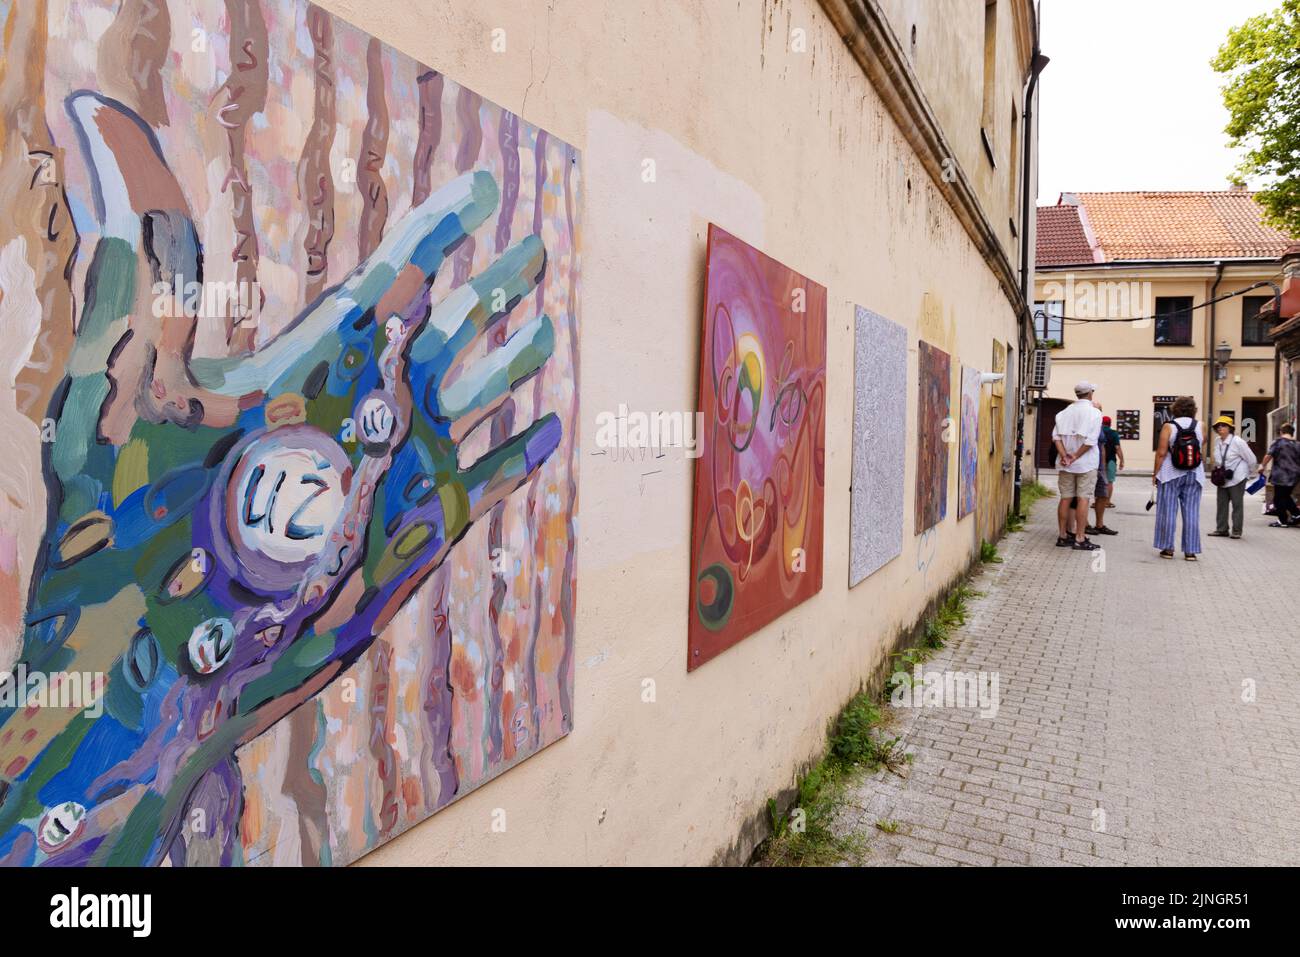 Lithuania tourism, tourists looking at the street art in the independent republic of Uzupis Vilnius, Lithuania Europe Stock Photo